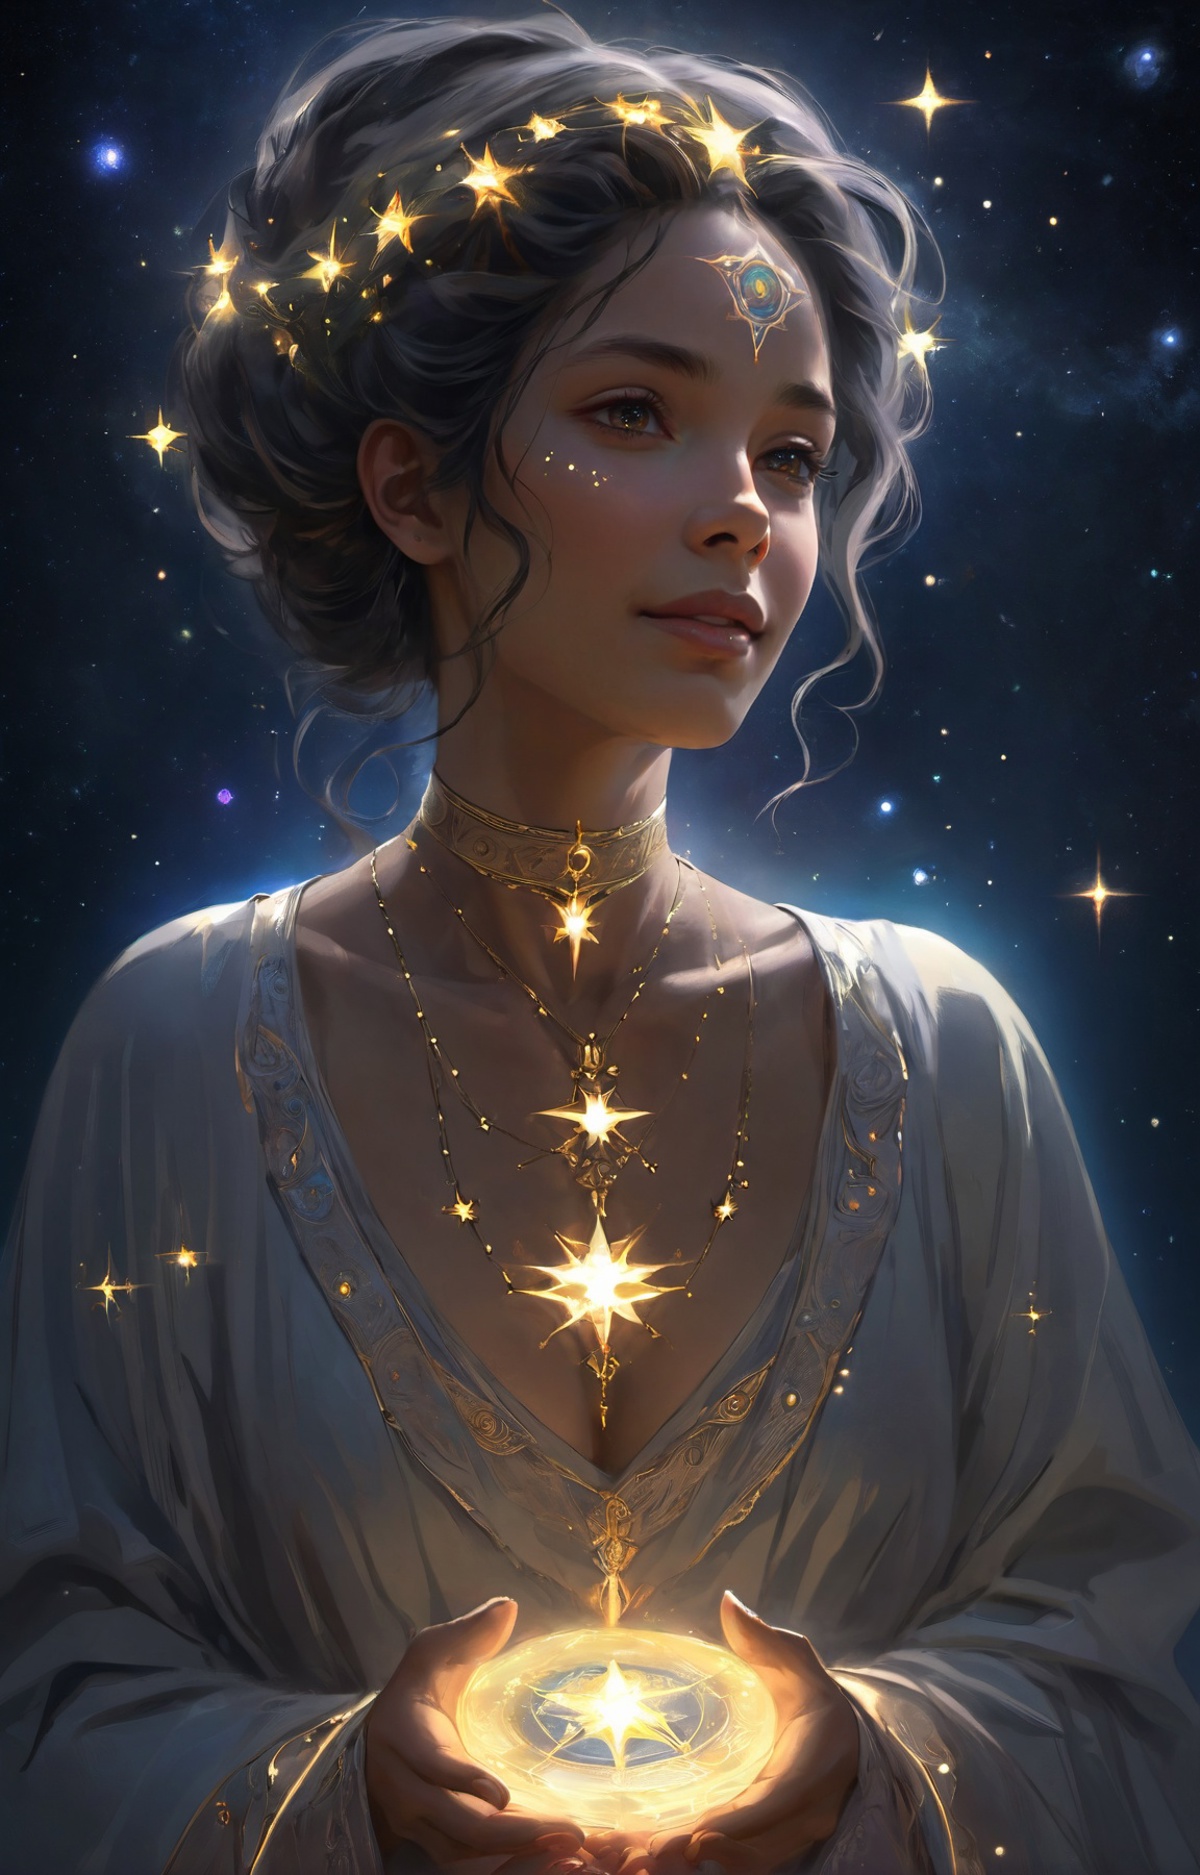 A woman with a star necklace and gold star earrings under a starry sky.